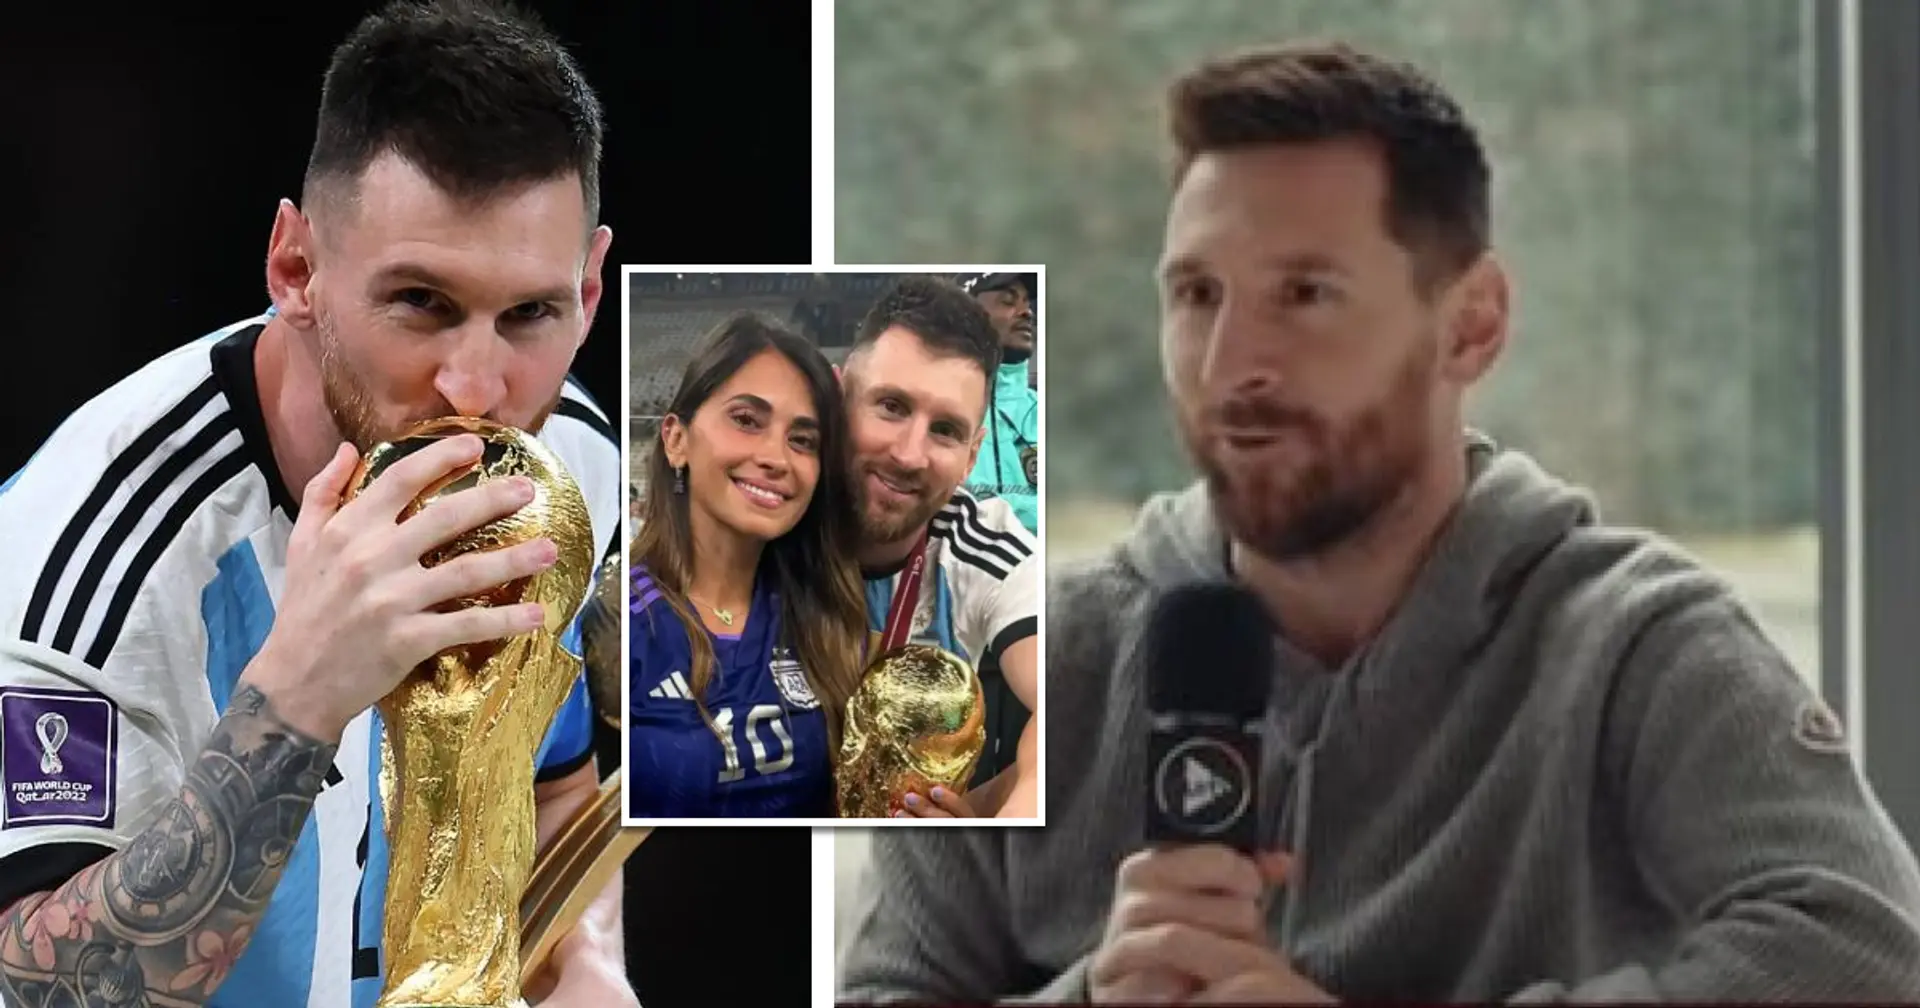 'The trophy told me to come close and hold it':  Leo Messi speaks for first time since World Cup triumph